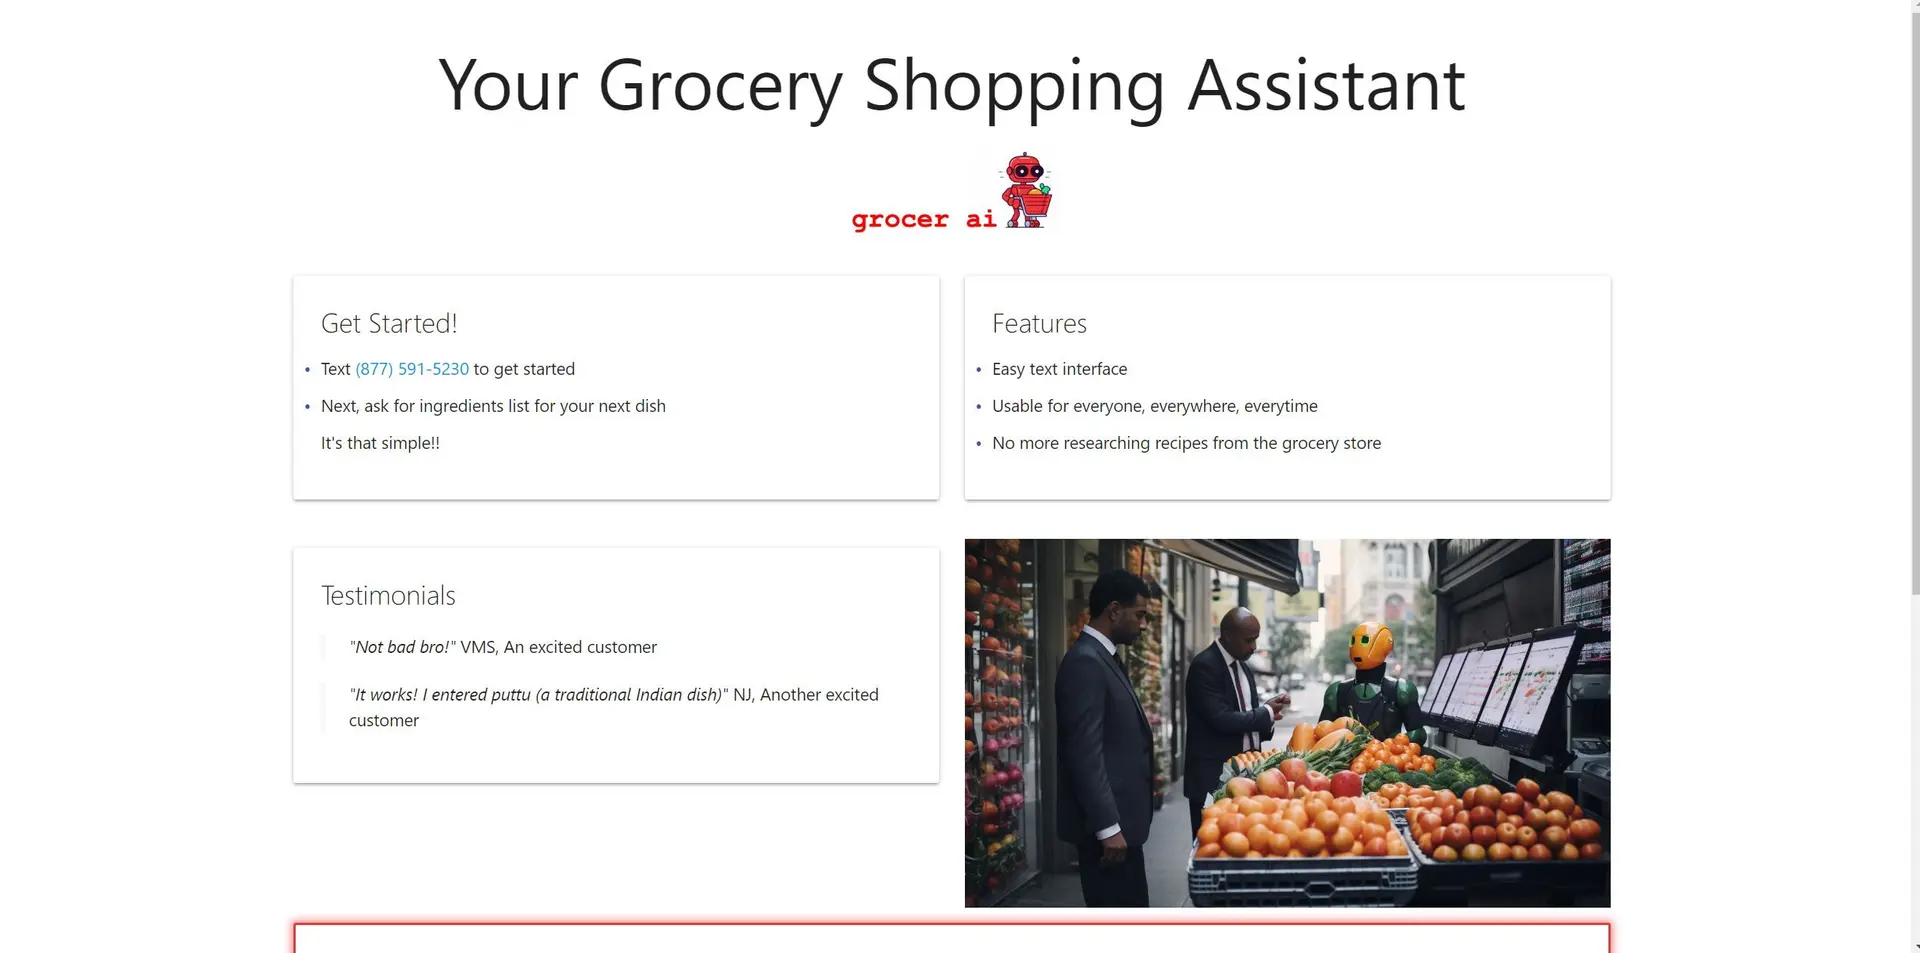 Grocer AIwebsite picture